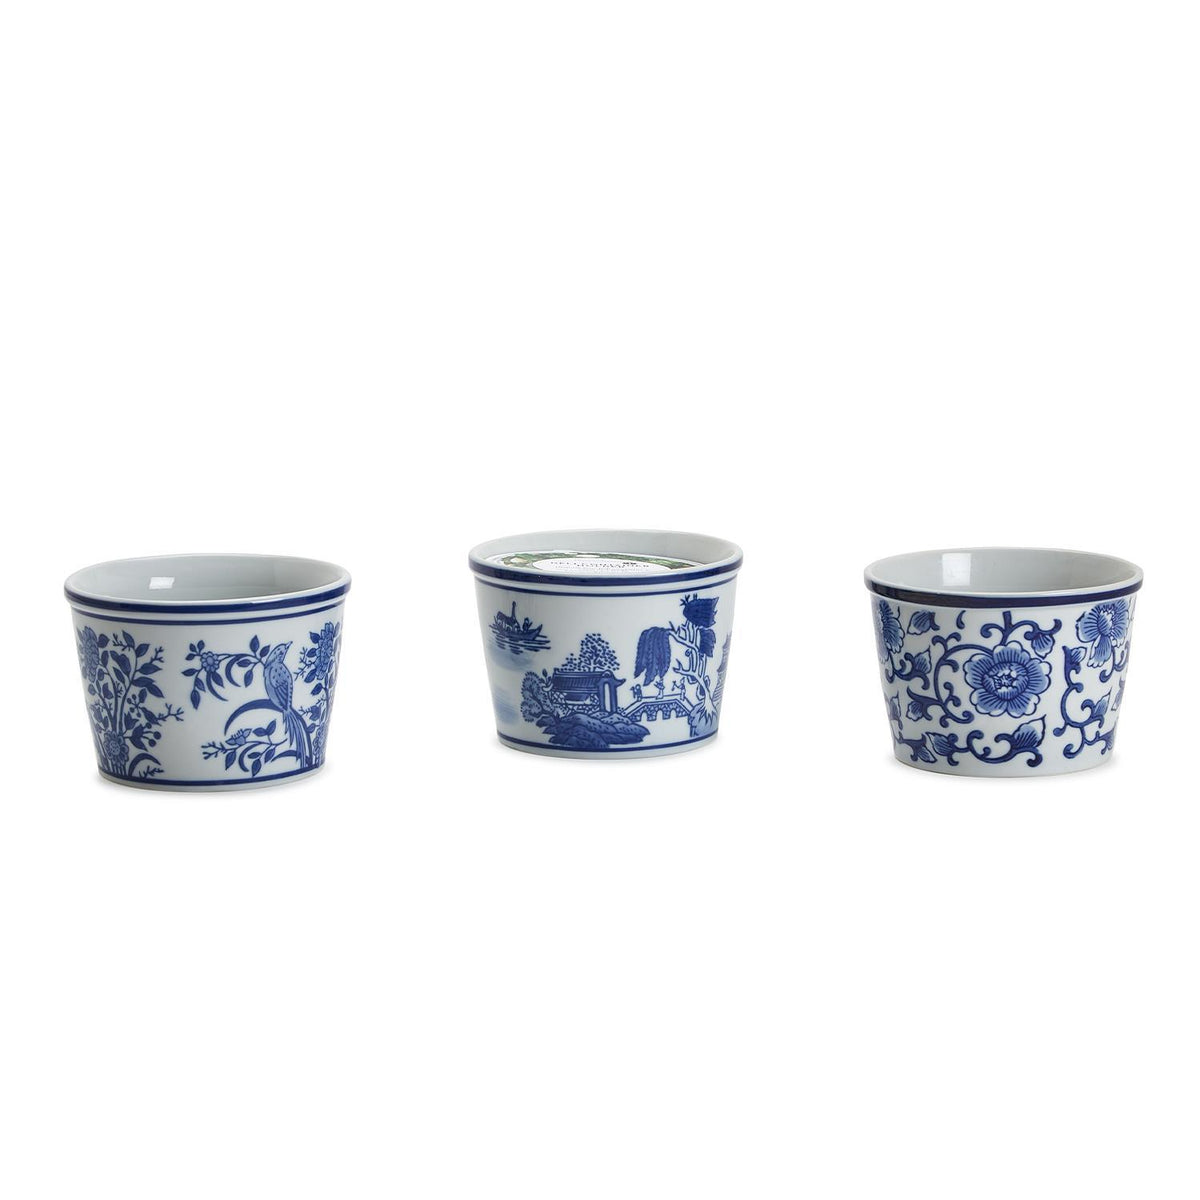 CHINOISERIE DELI CONTAINER HOLDER SET